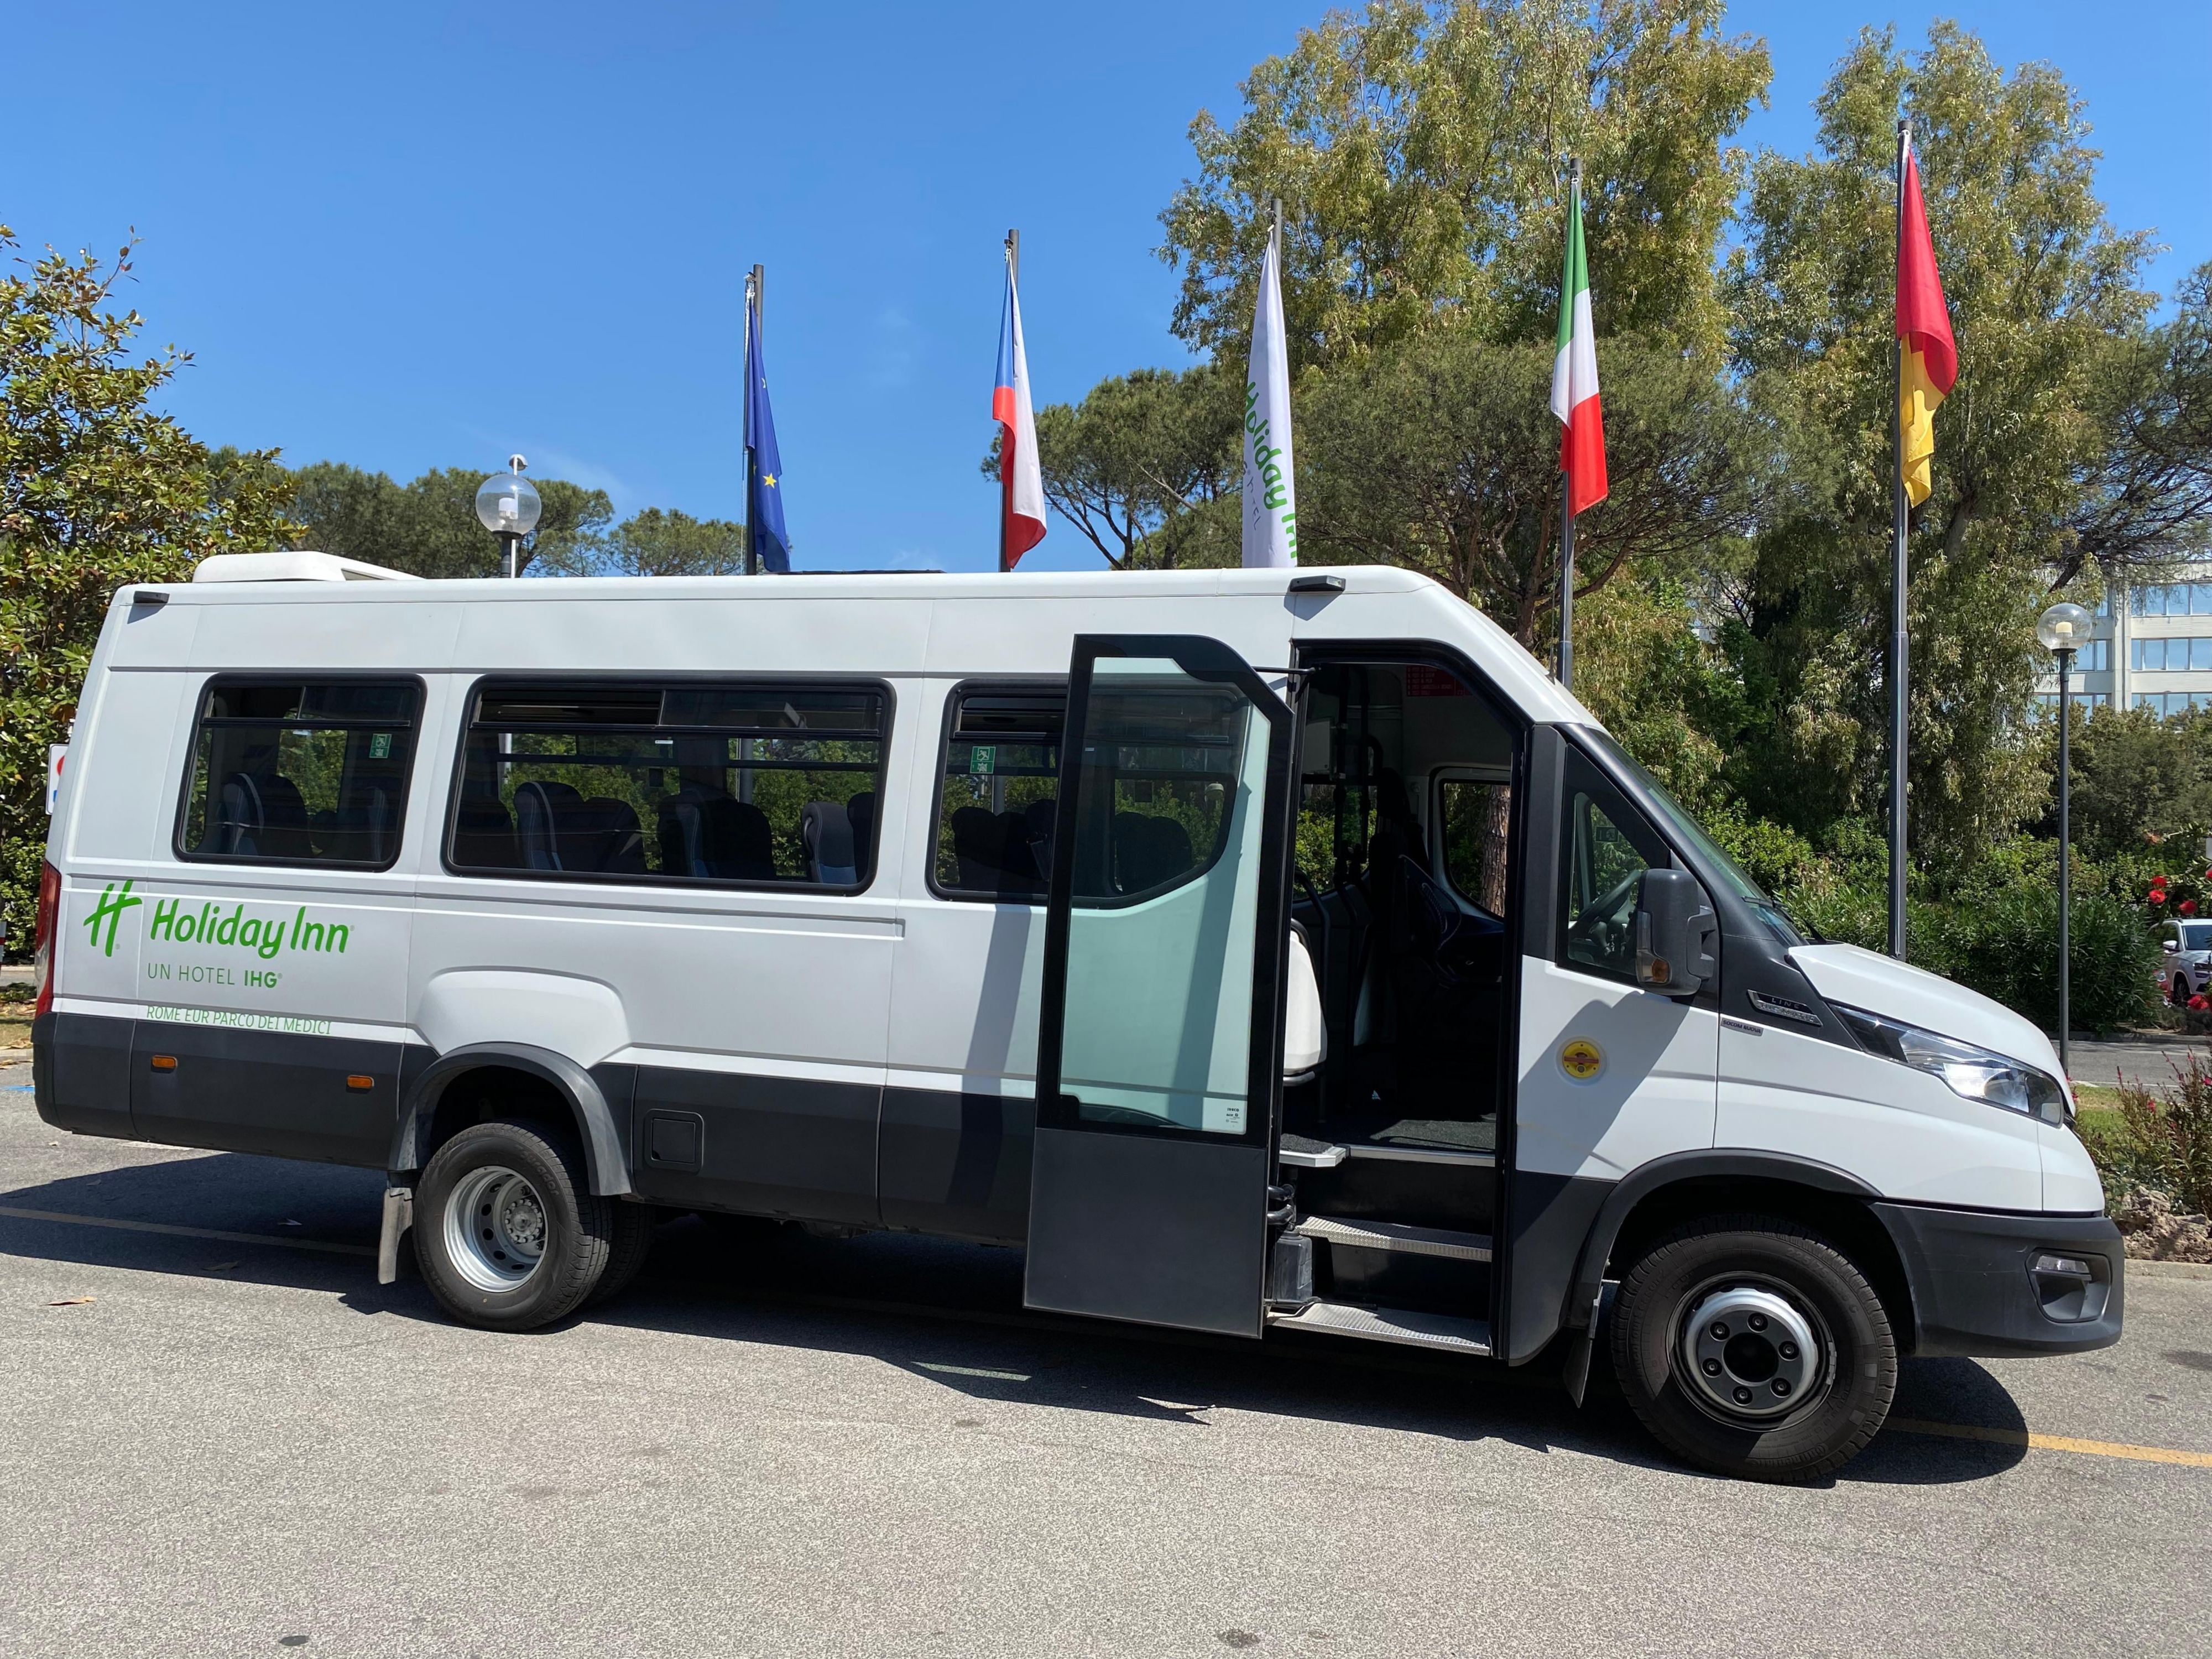 Every day, free shuttle bus rides from the FCO airport to the hotel are available at predetermined times. Contact the hotel for details of the timing and to reserve your seat.